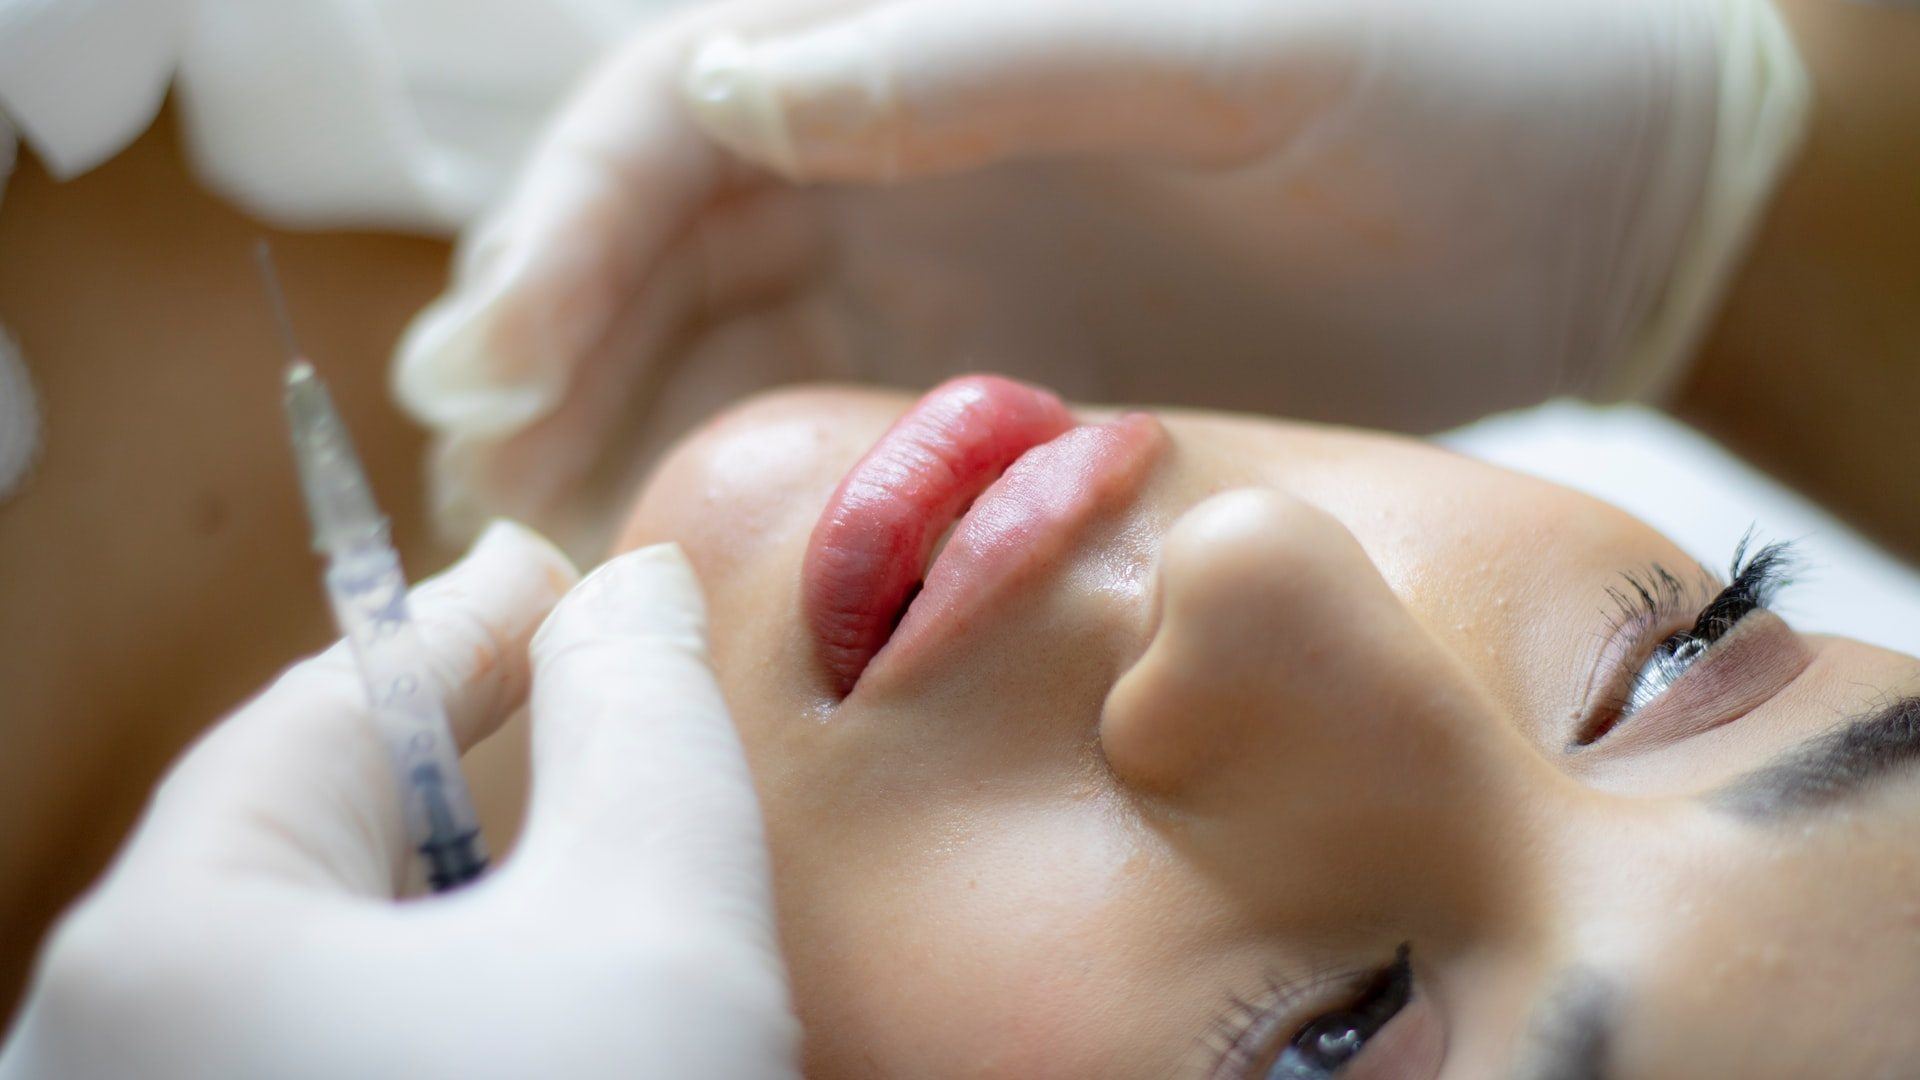 Struggle With Grinding Your Teeth? Botox Might Help